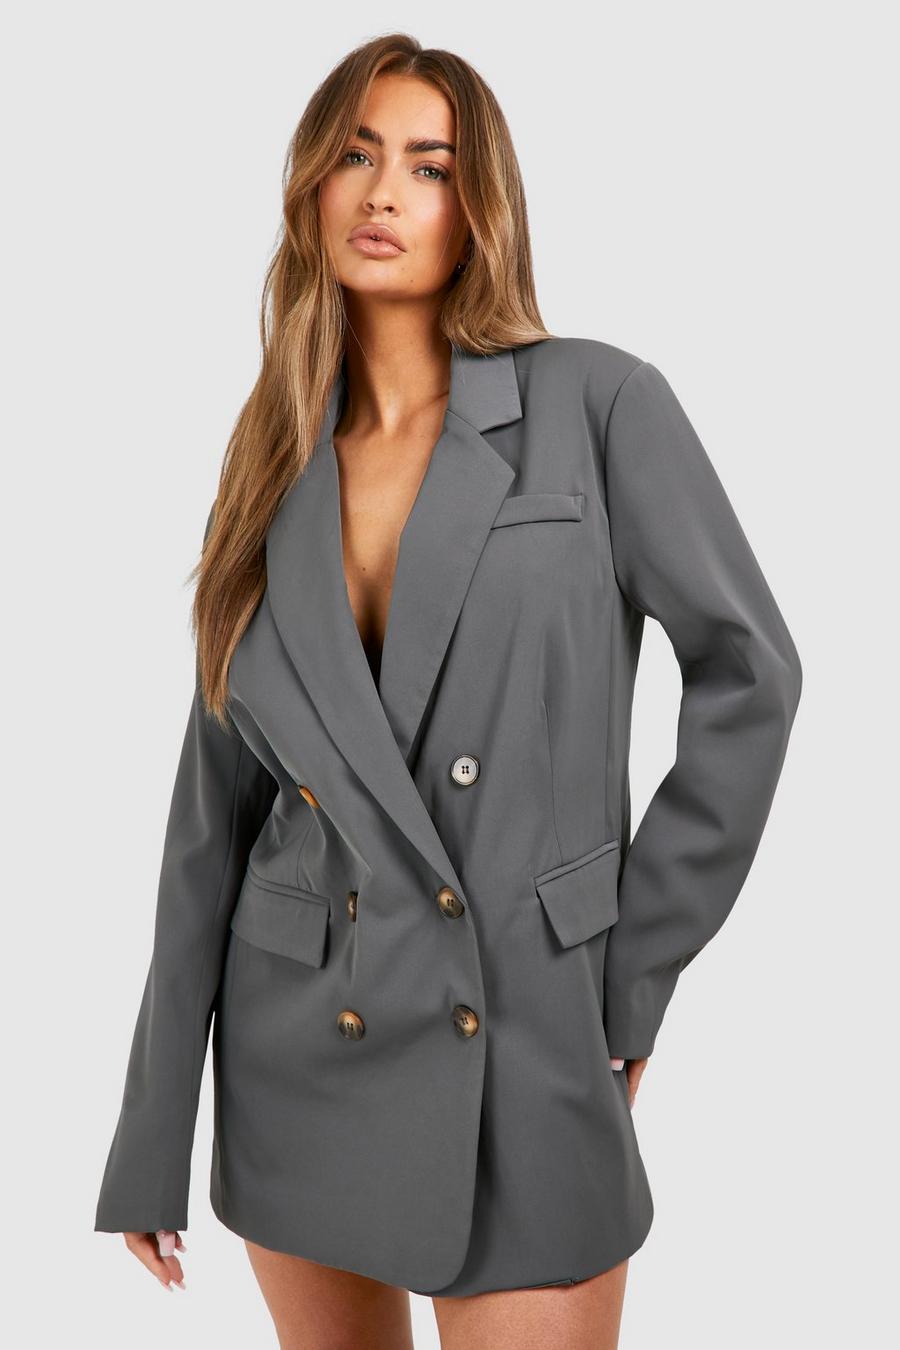 Charcoal grey Double Breasted Mansy Blazer Dress